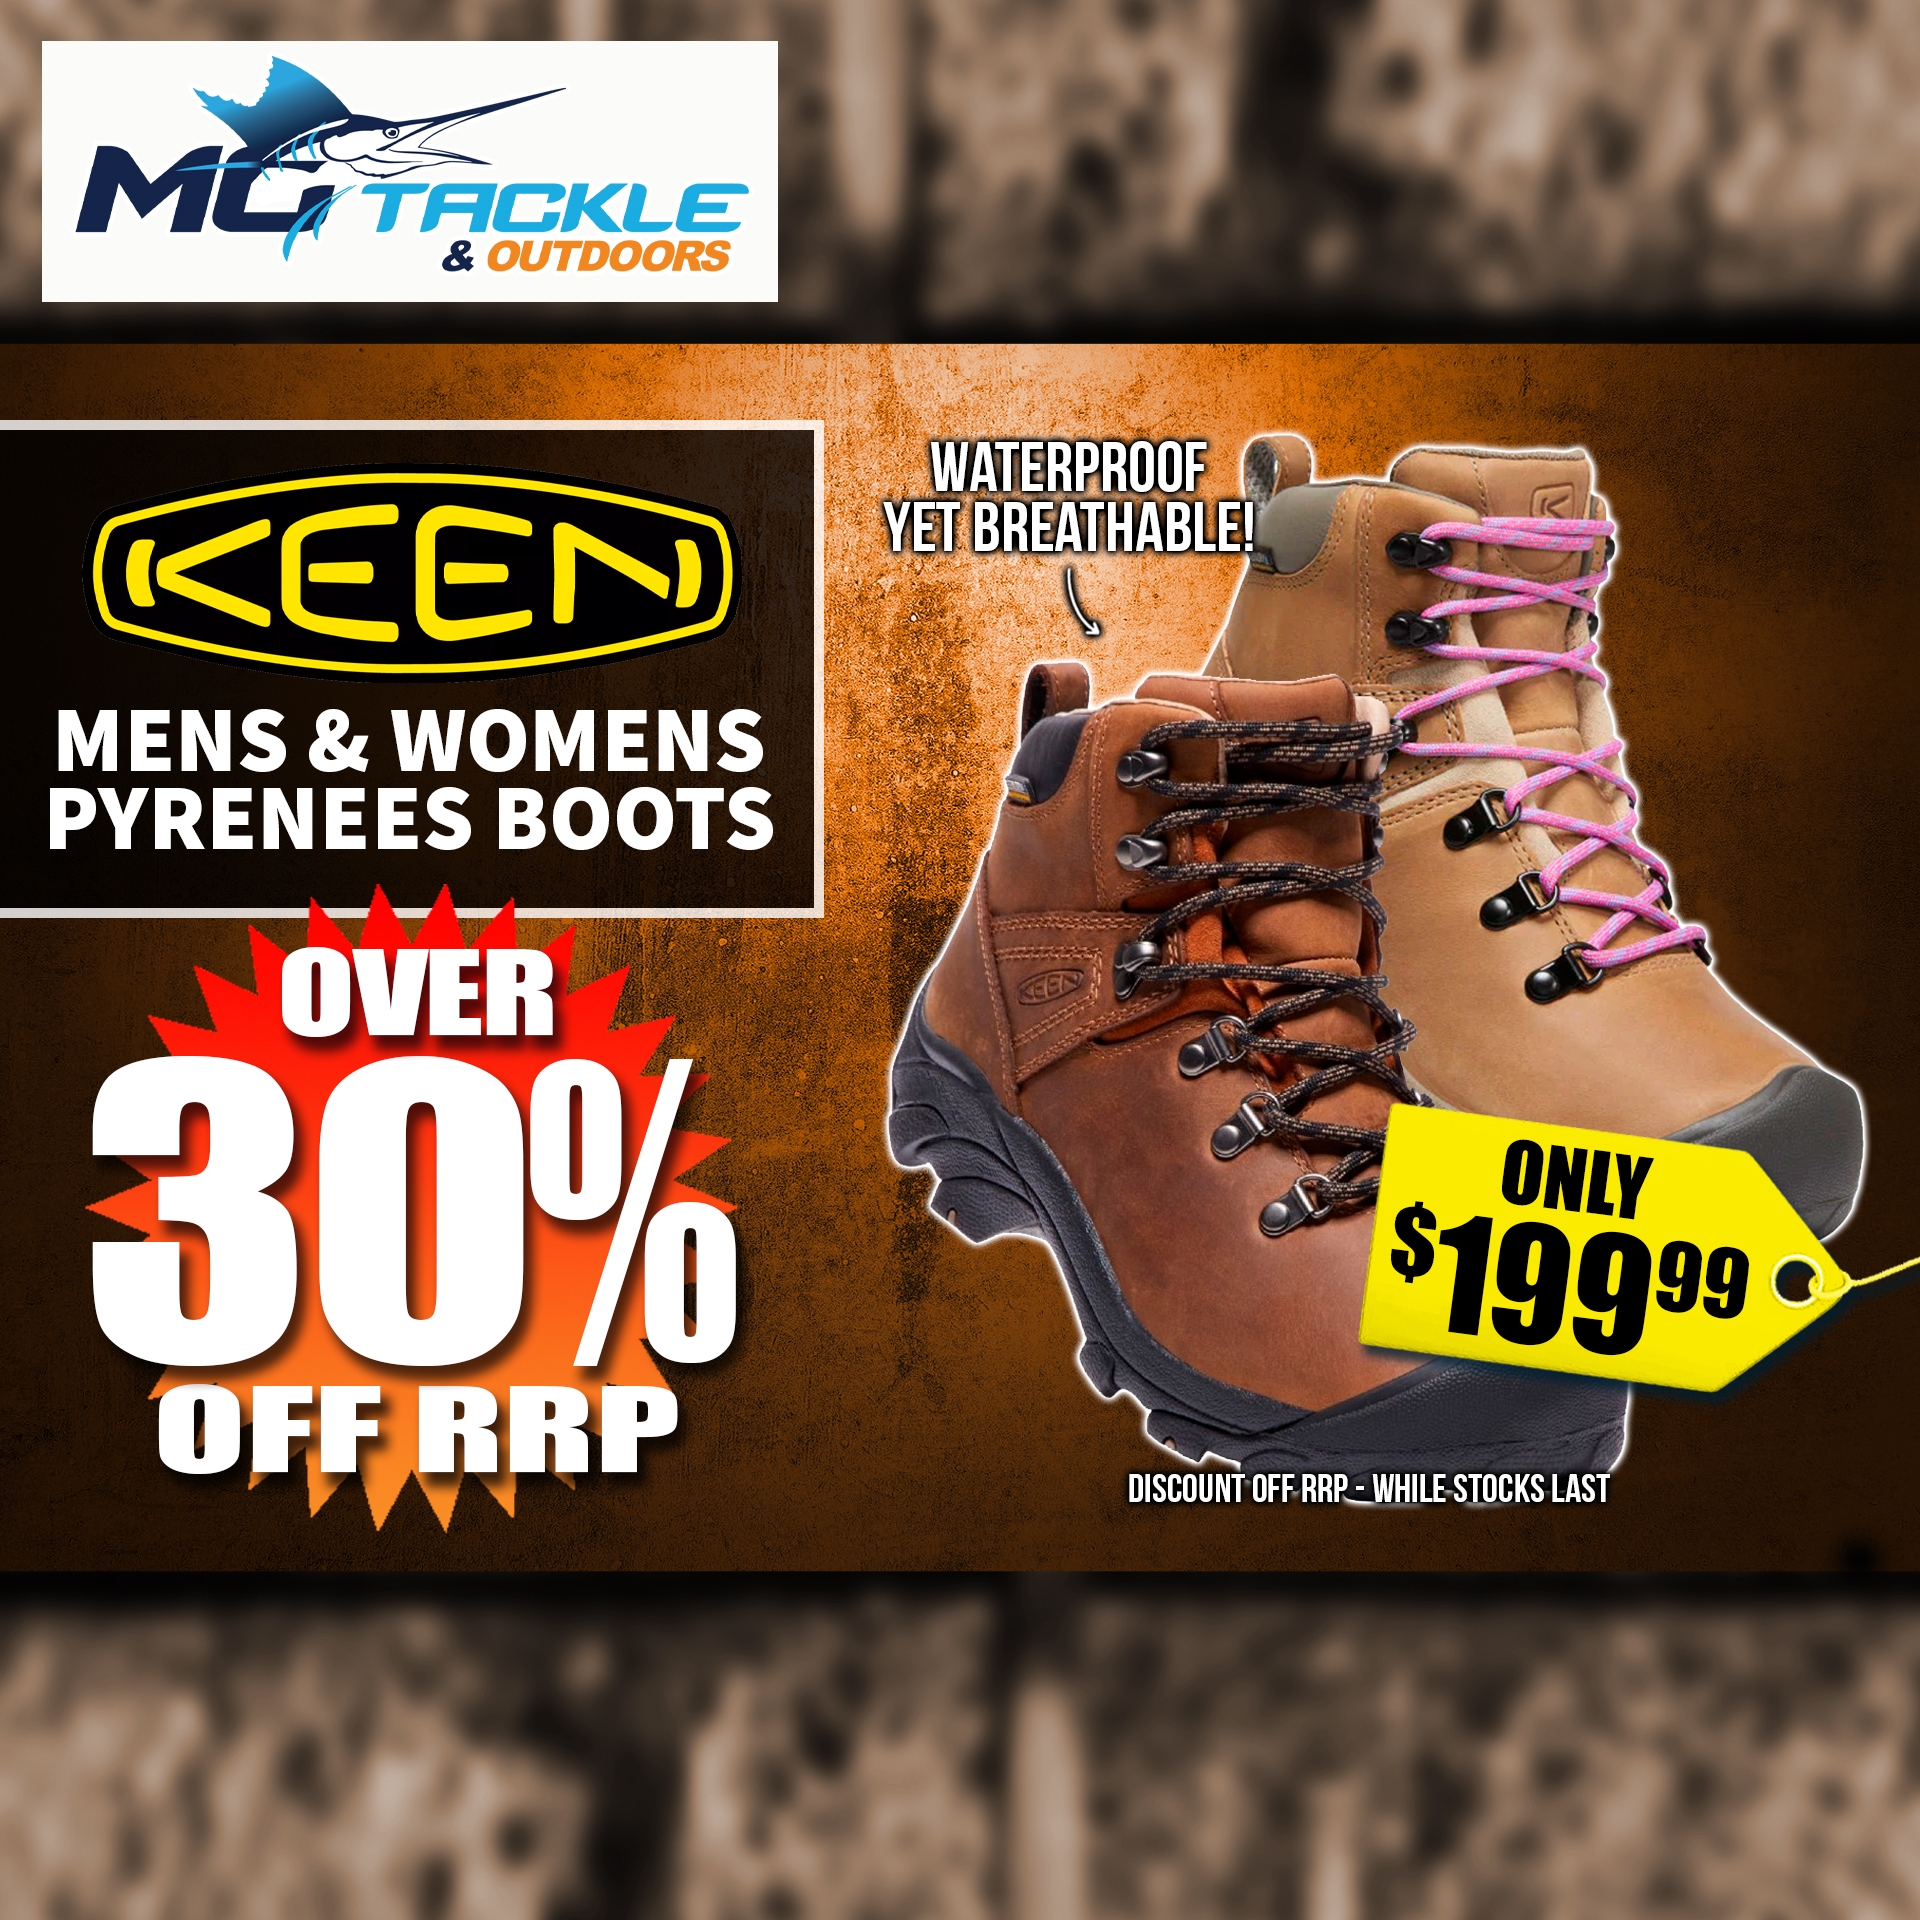 30% off Keen Pyrenees Boots